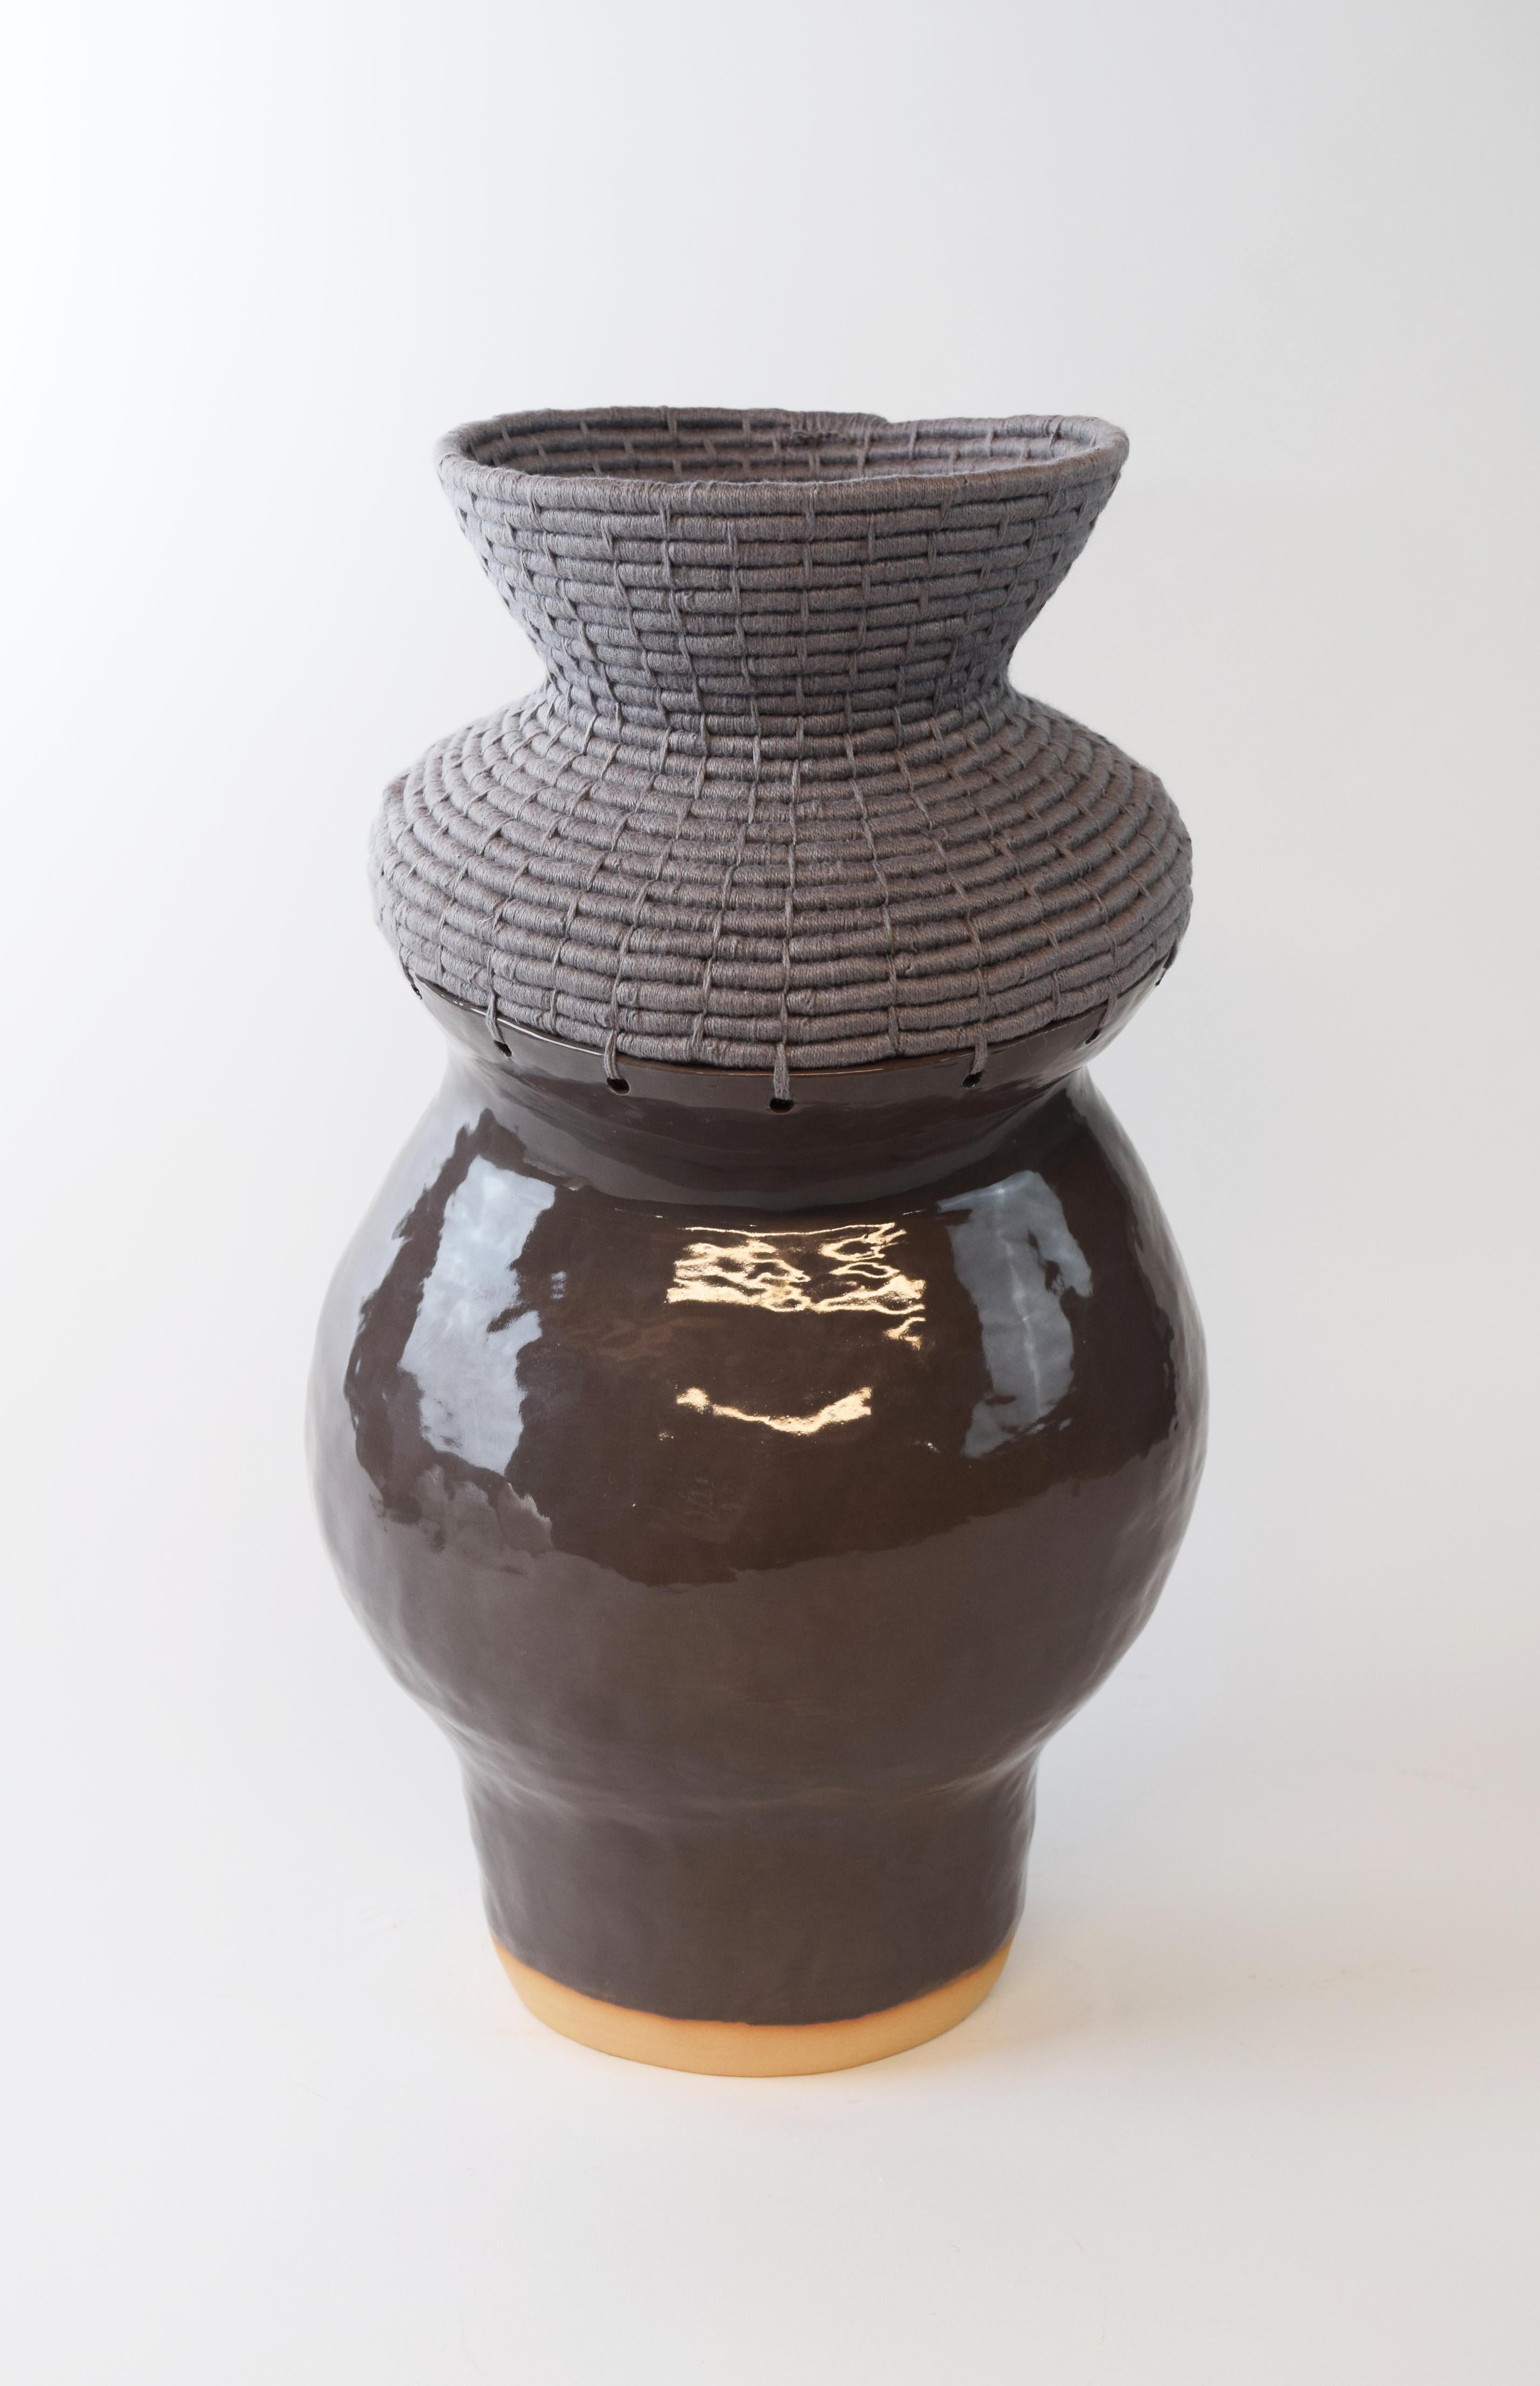 Hand formed asymmetrical stoneware vessel with gloss charcoal glaze. The top part of the vessel is woven in gray cotton, showcasing the interplay of ceramic and fiber. 

18”H x 9”W

One of a kind collections with a limited number of pieces are